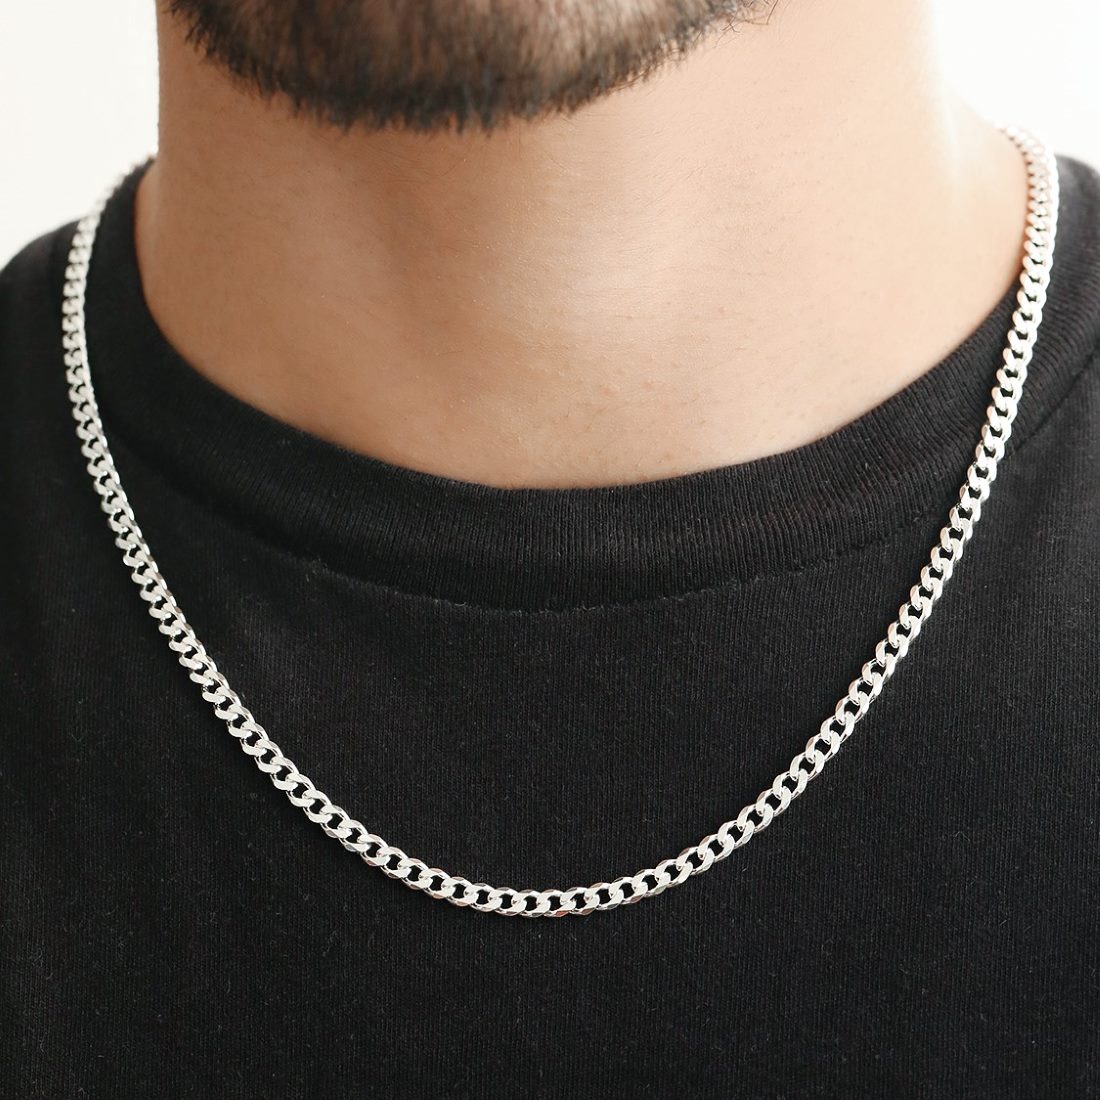 The Classic Silver-Plated Linkage 925 Sterling Silver Chain for Him